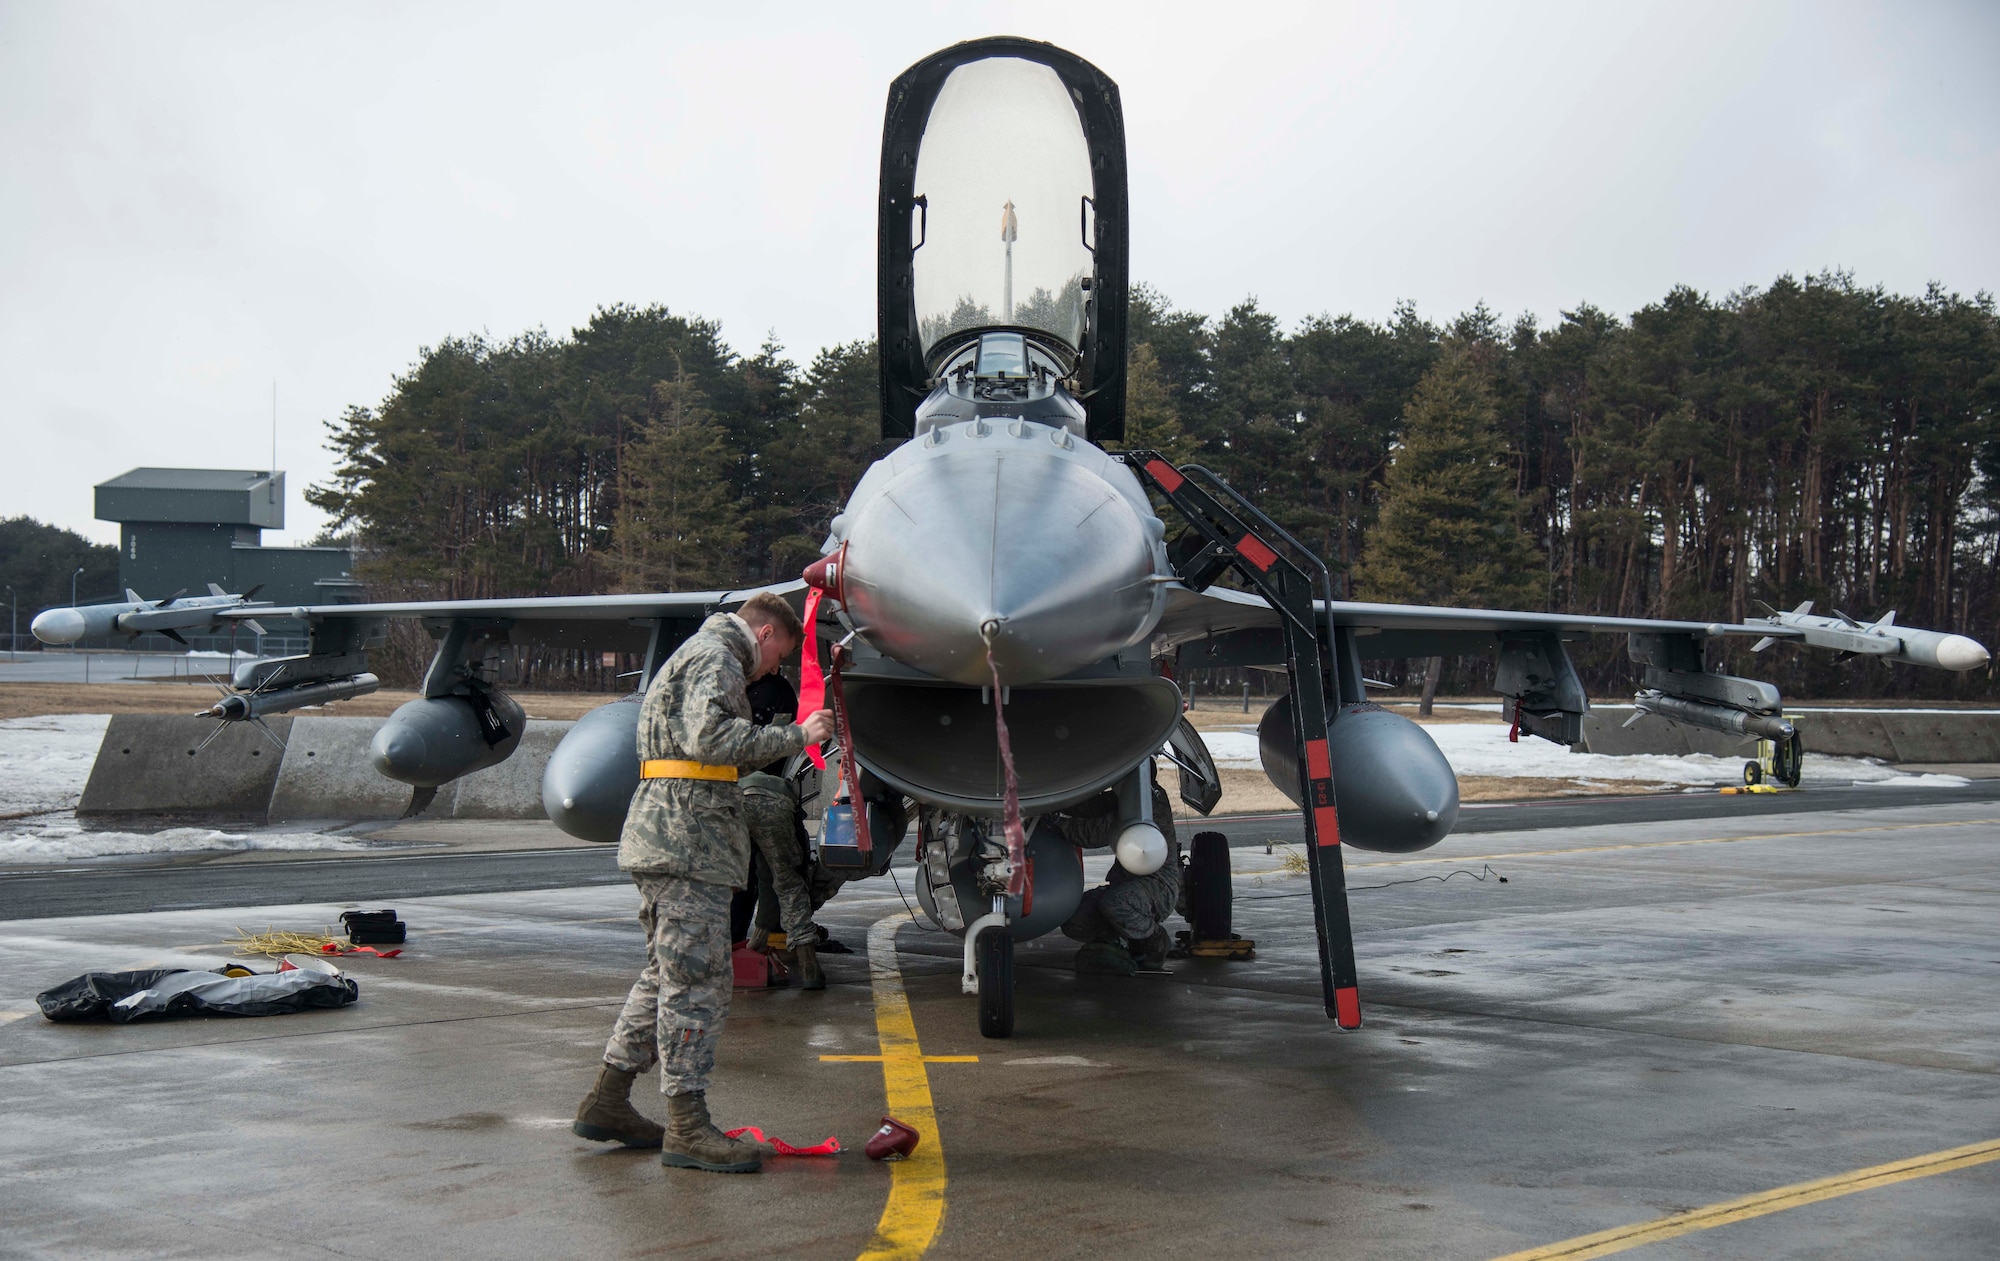 Airman 1st Class Shelby Flowers, 14th Aircraft Maintenance Unit avionics technician, places a cover on an F-16 Fighting Falcon at Misawa Air Base, Japan, March 4, 2017. Aircraft returned from COPE NORTH 17, an annual exercise serving as a keystone event promoting stability and security throughout the Indo-Asia-Pacific region. COPE NORTH dates back to 1978 when it took place here. (U.S. Air Force photo by Senior Airman Brittany A. Chase)